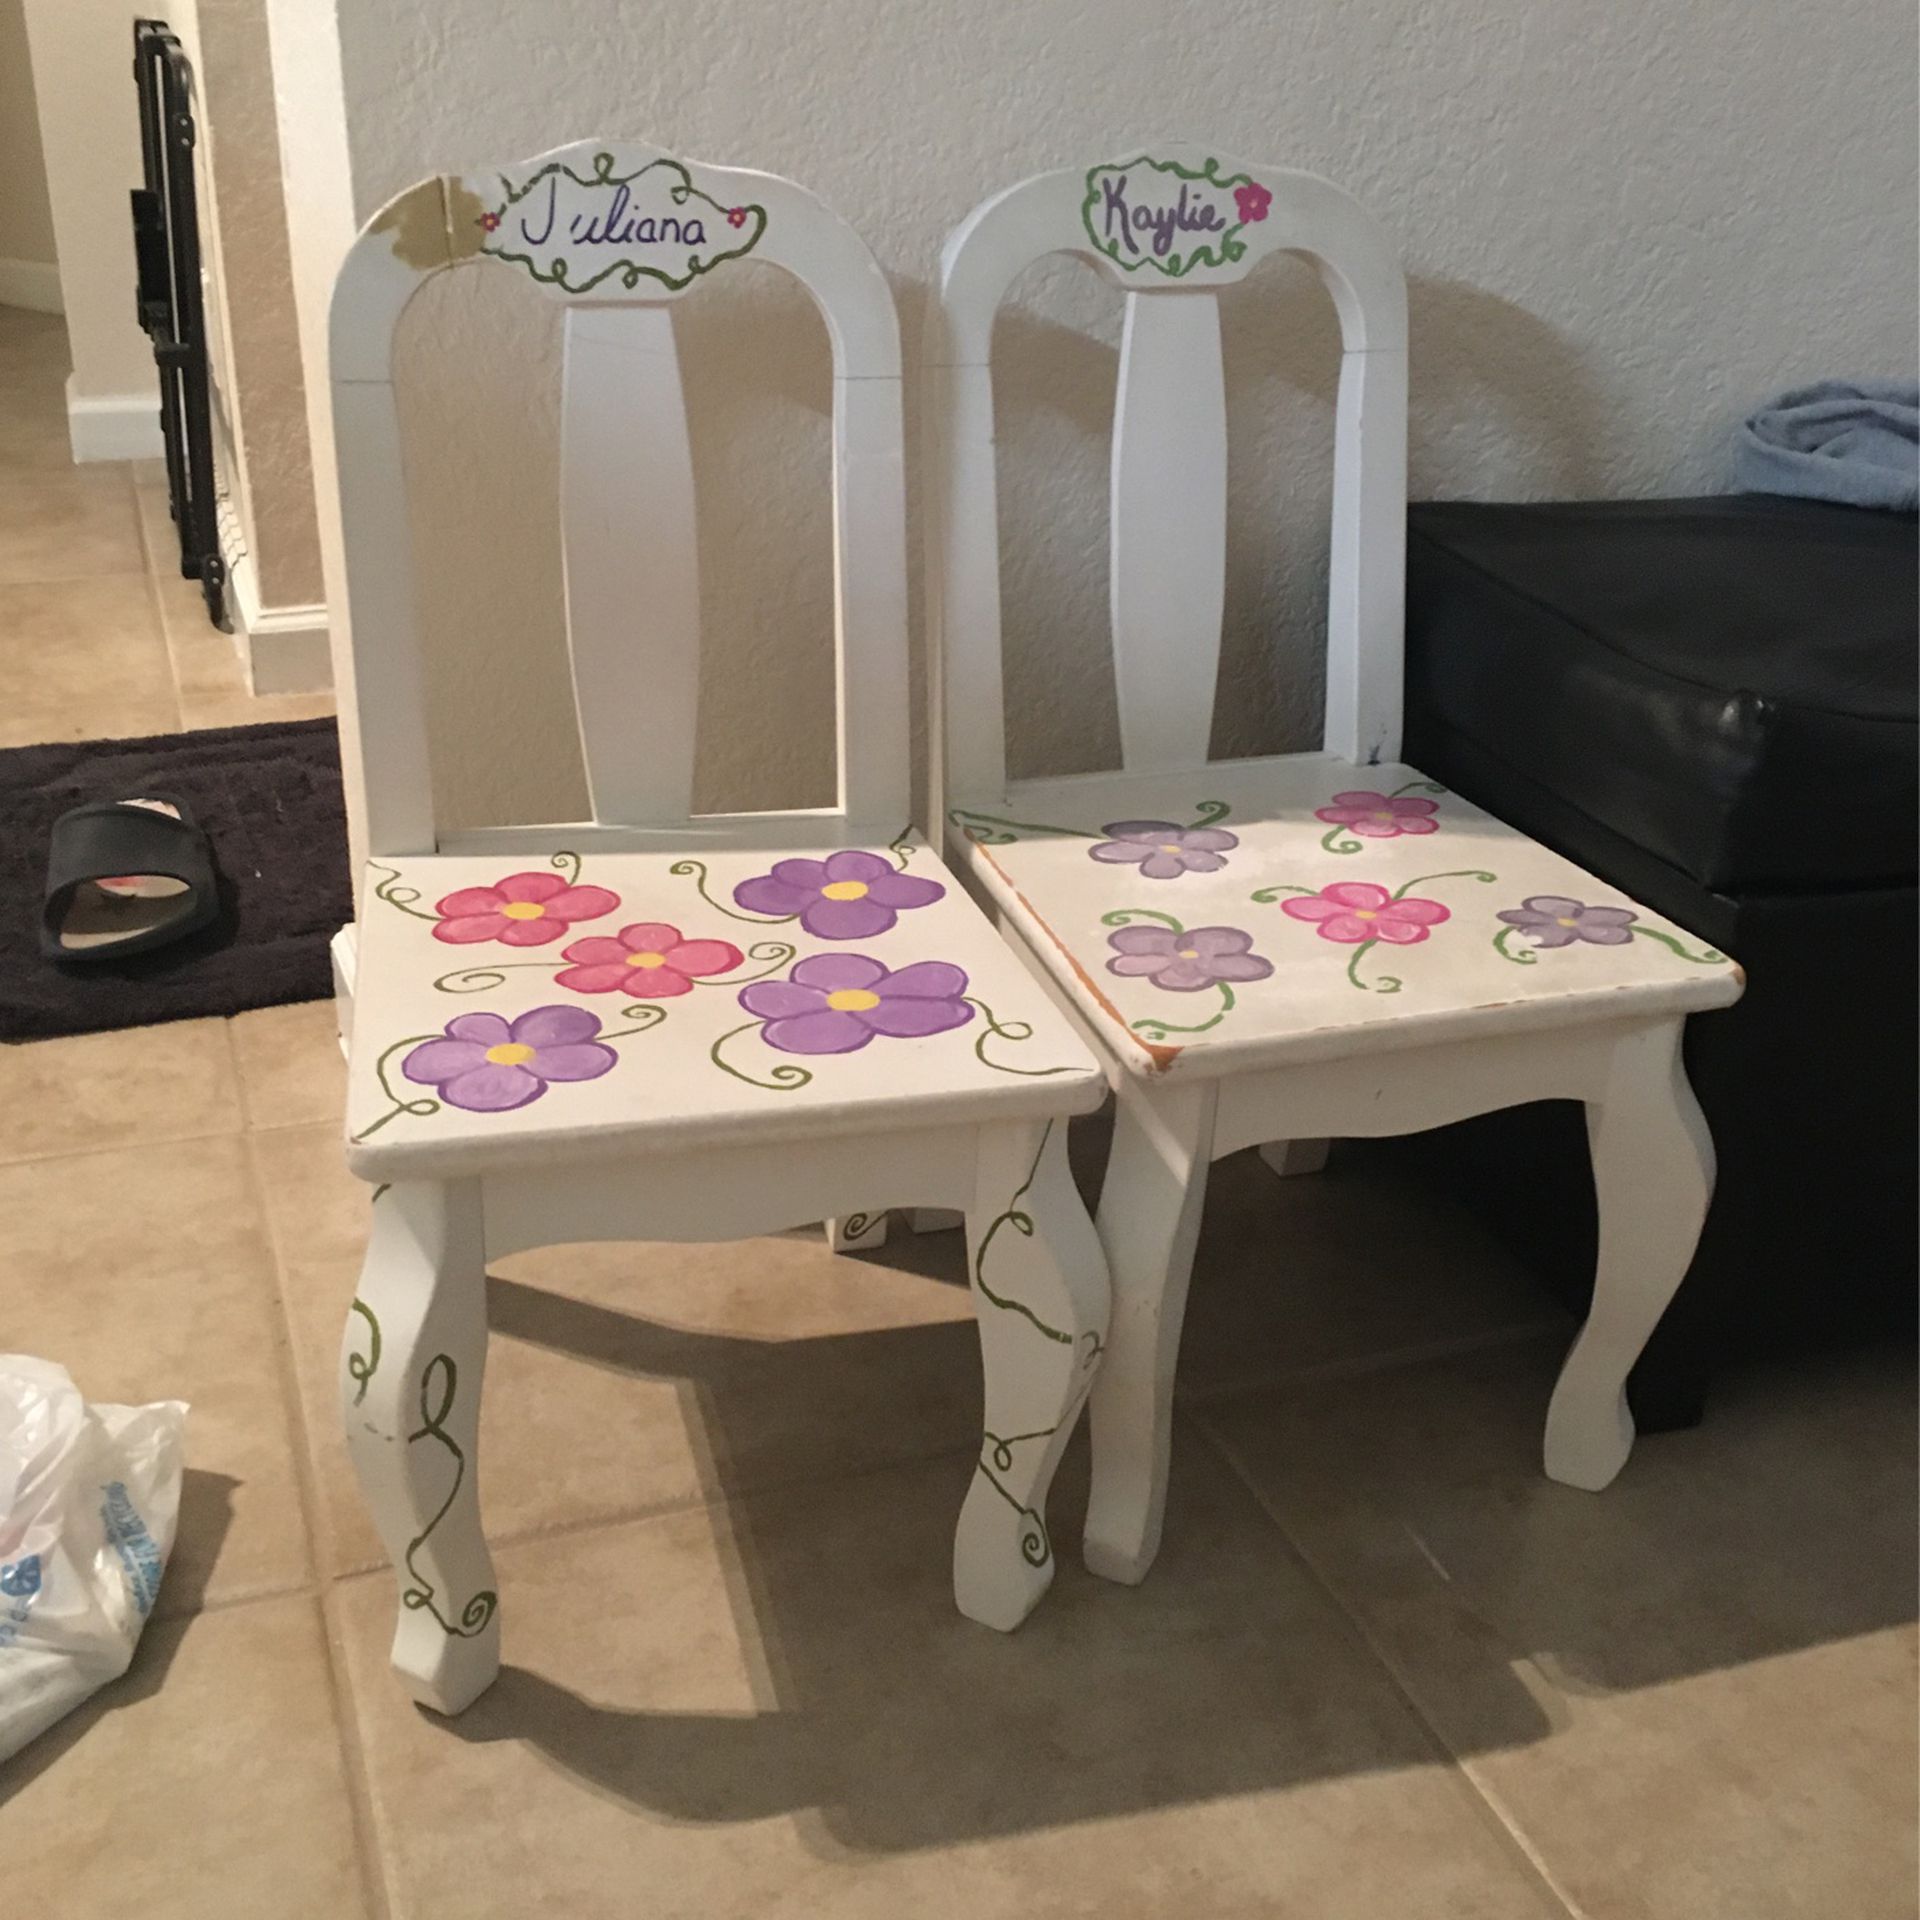 2 Kids Chairs In Need Of Some Love